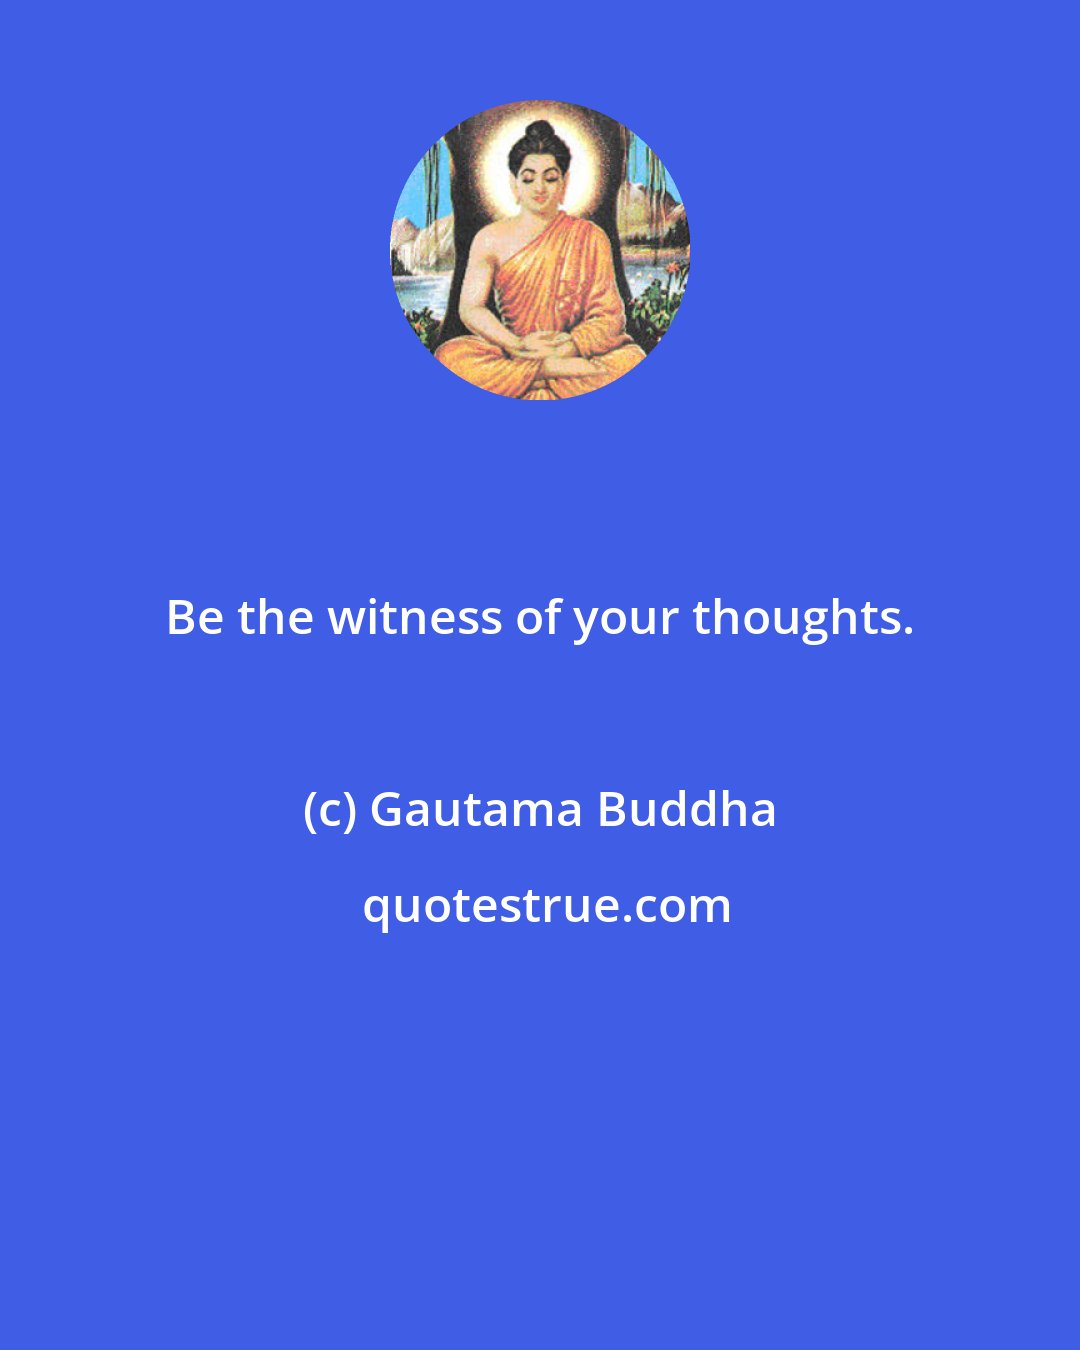 Gautama Buddha: Be the witness of your thoughts.